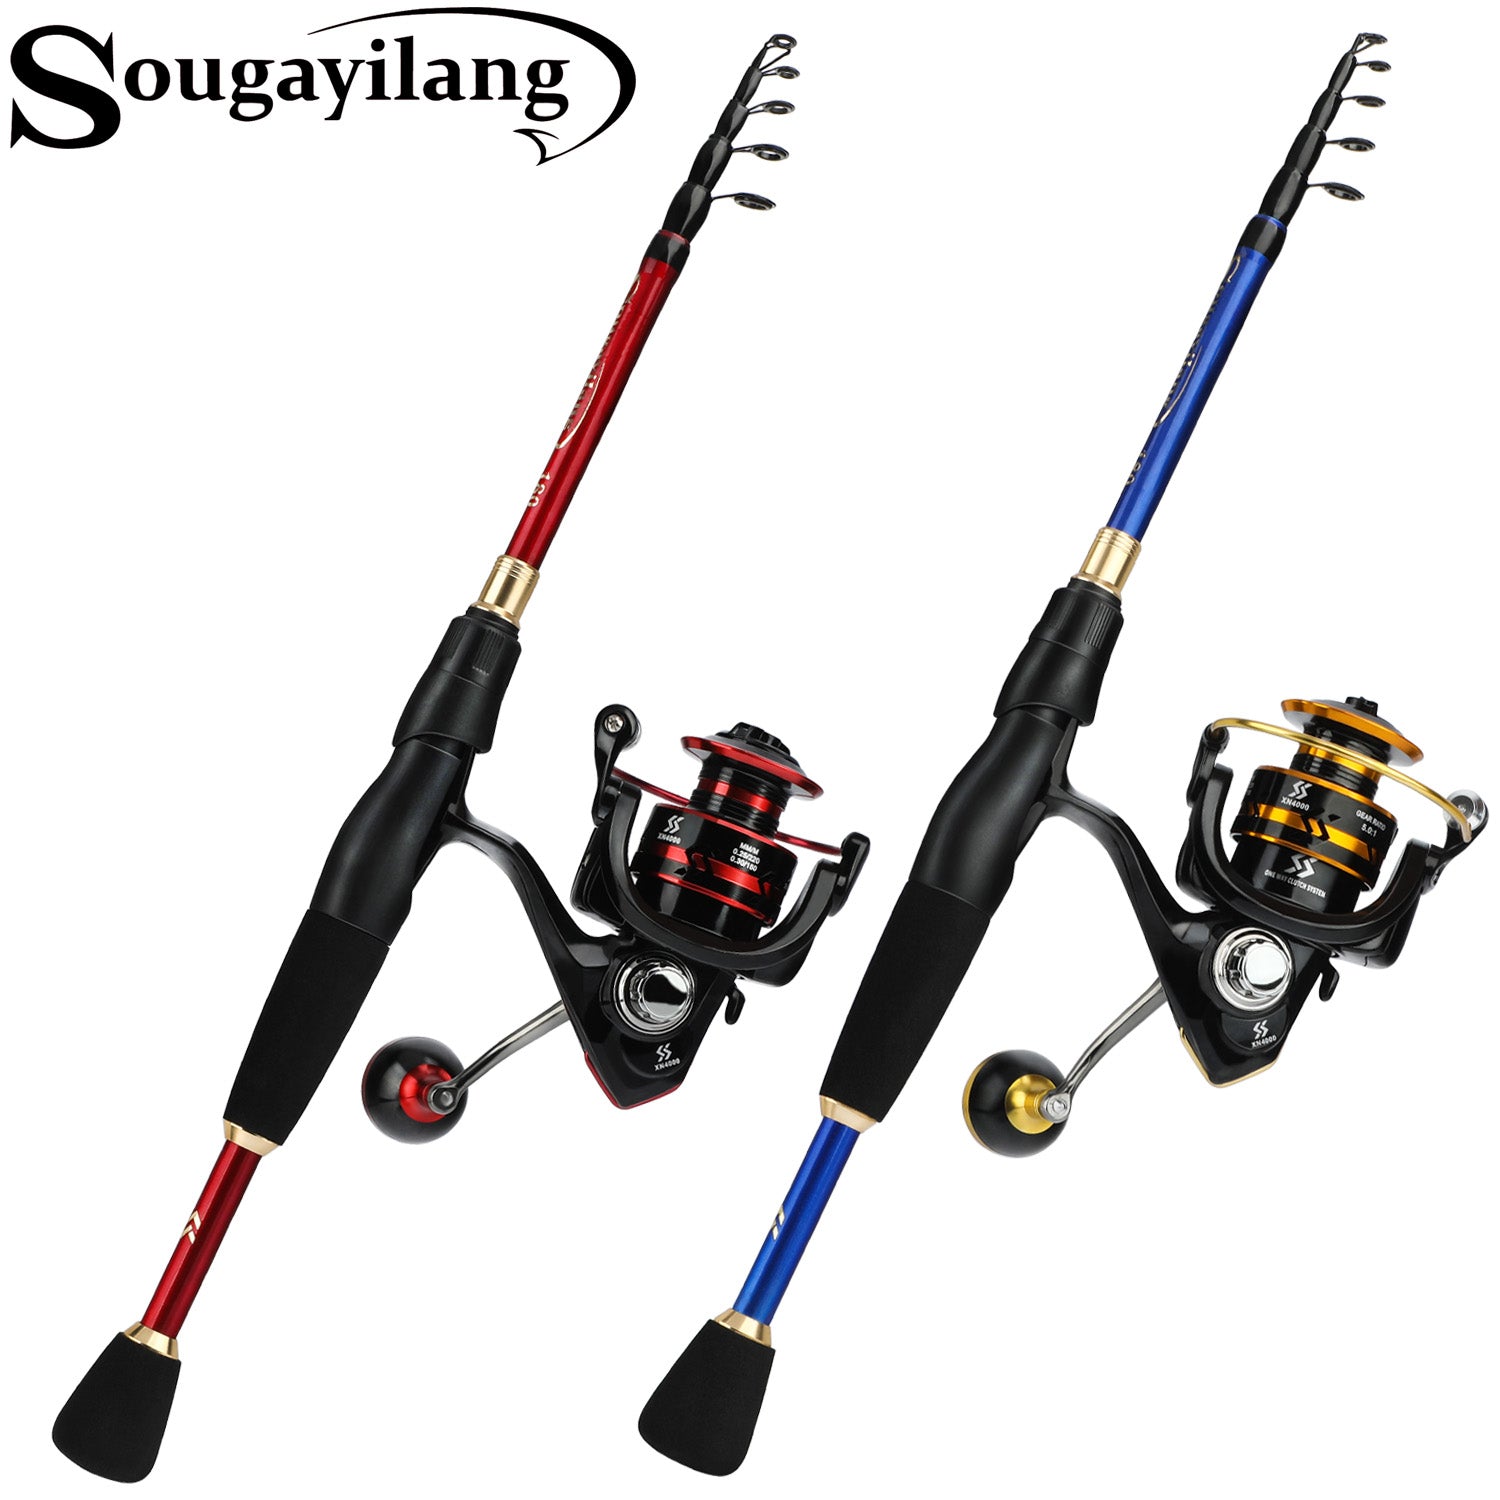 Sougayilang 1.6M Fishing Rod and Spinning Fishing Reel with